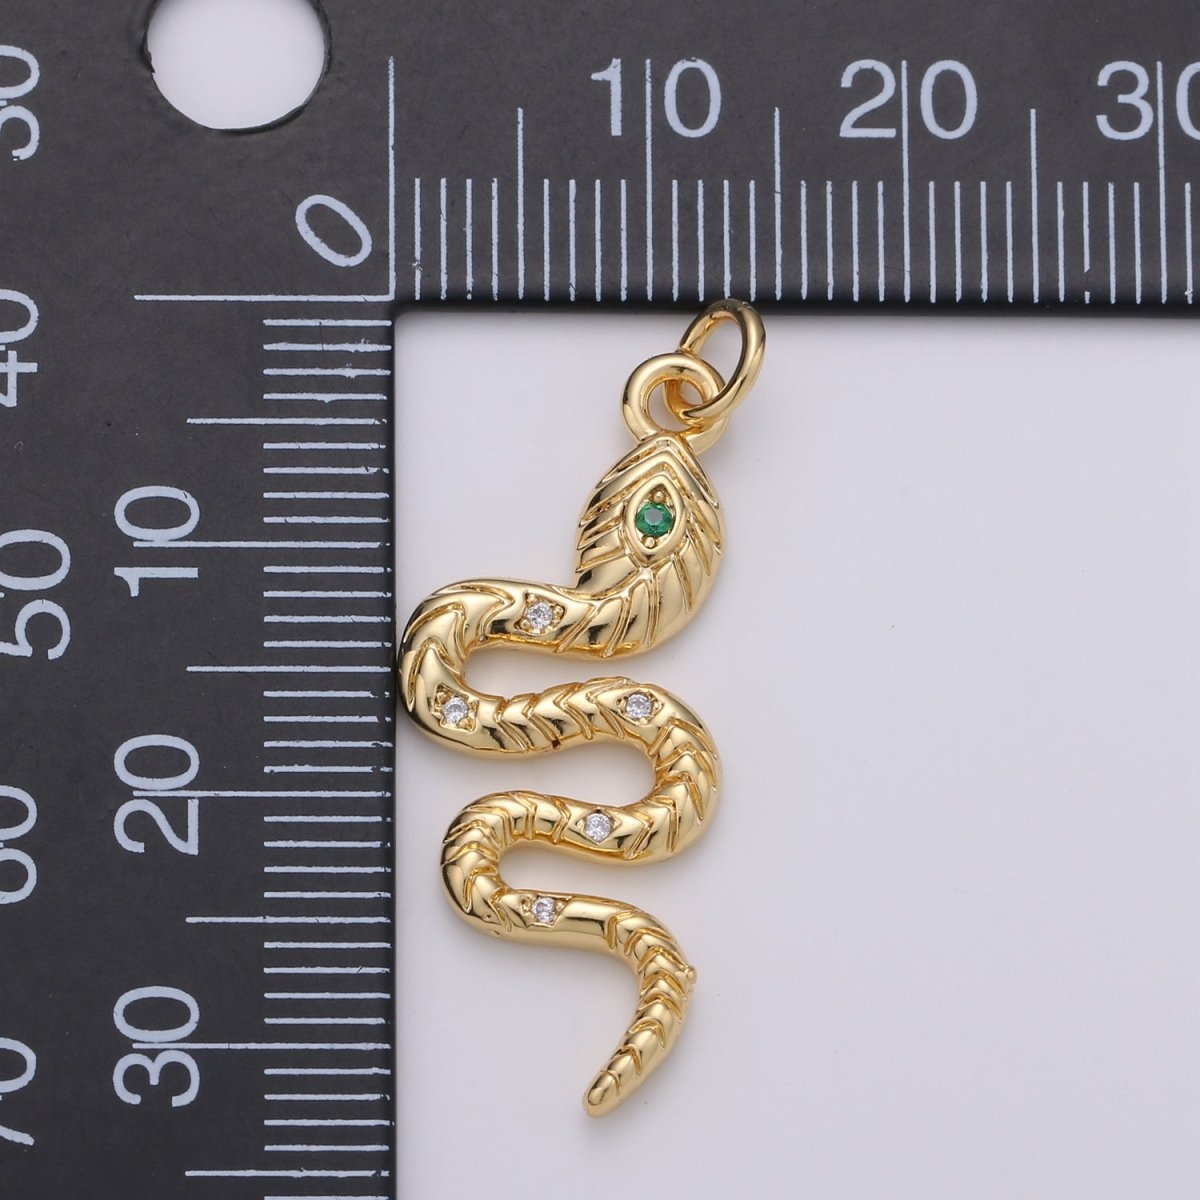 Gold Snake Charm, 24K Gold Filled Snake Pendant for Necklace Making, 35x14mm, Green Serpent Micro CZ Pave Charm, Jewelry Finding,E-115 - DLUXCA